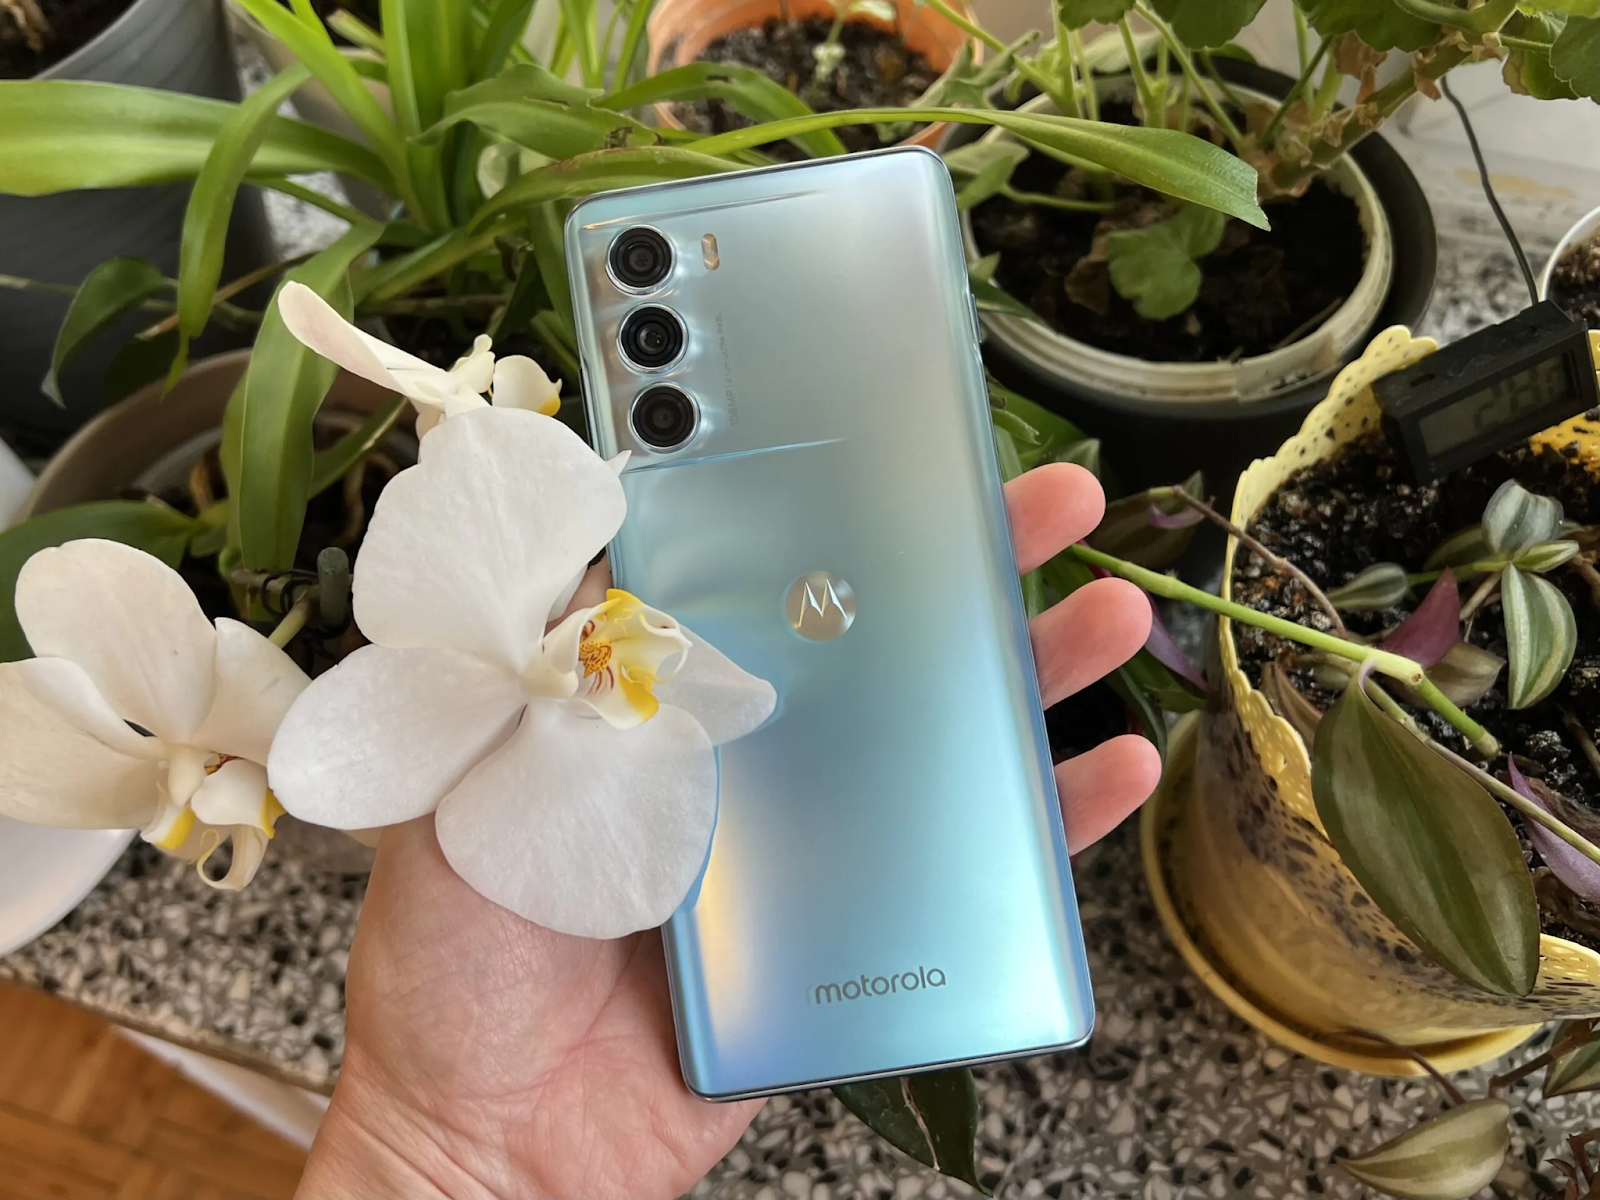 This image shows the Motorola G200 in the hands of a man with flowers around.